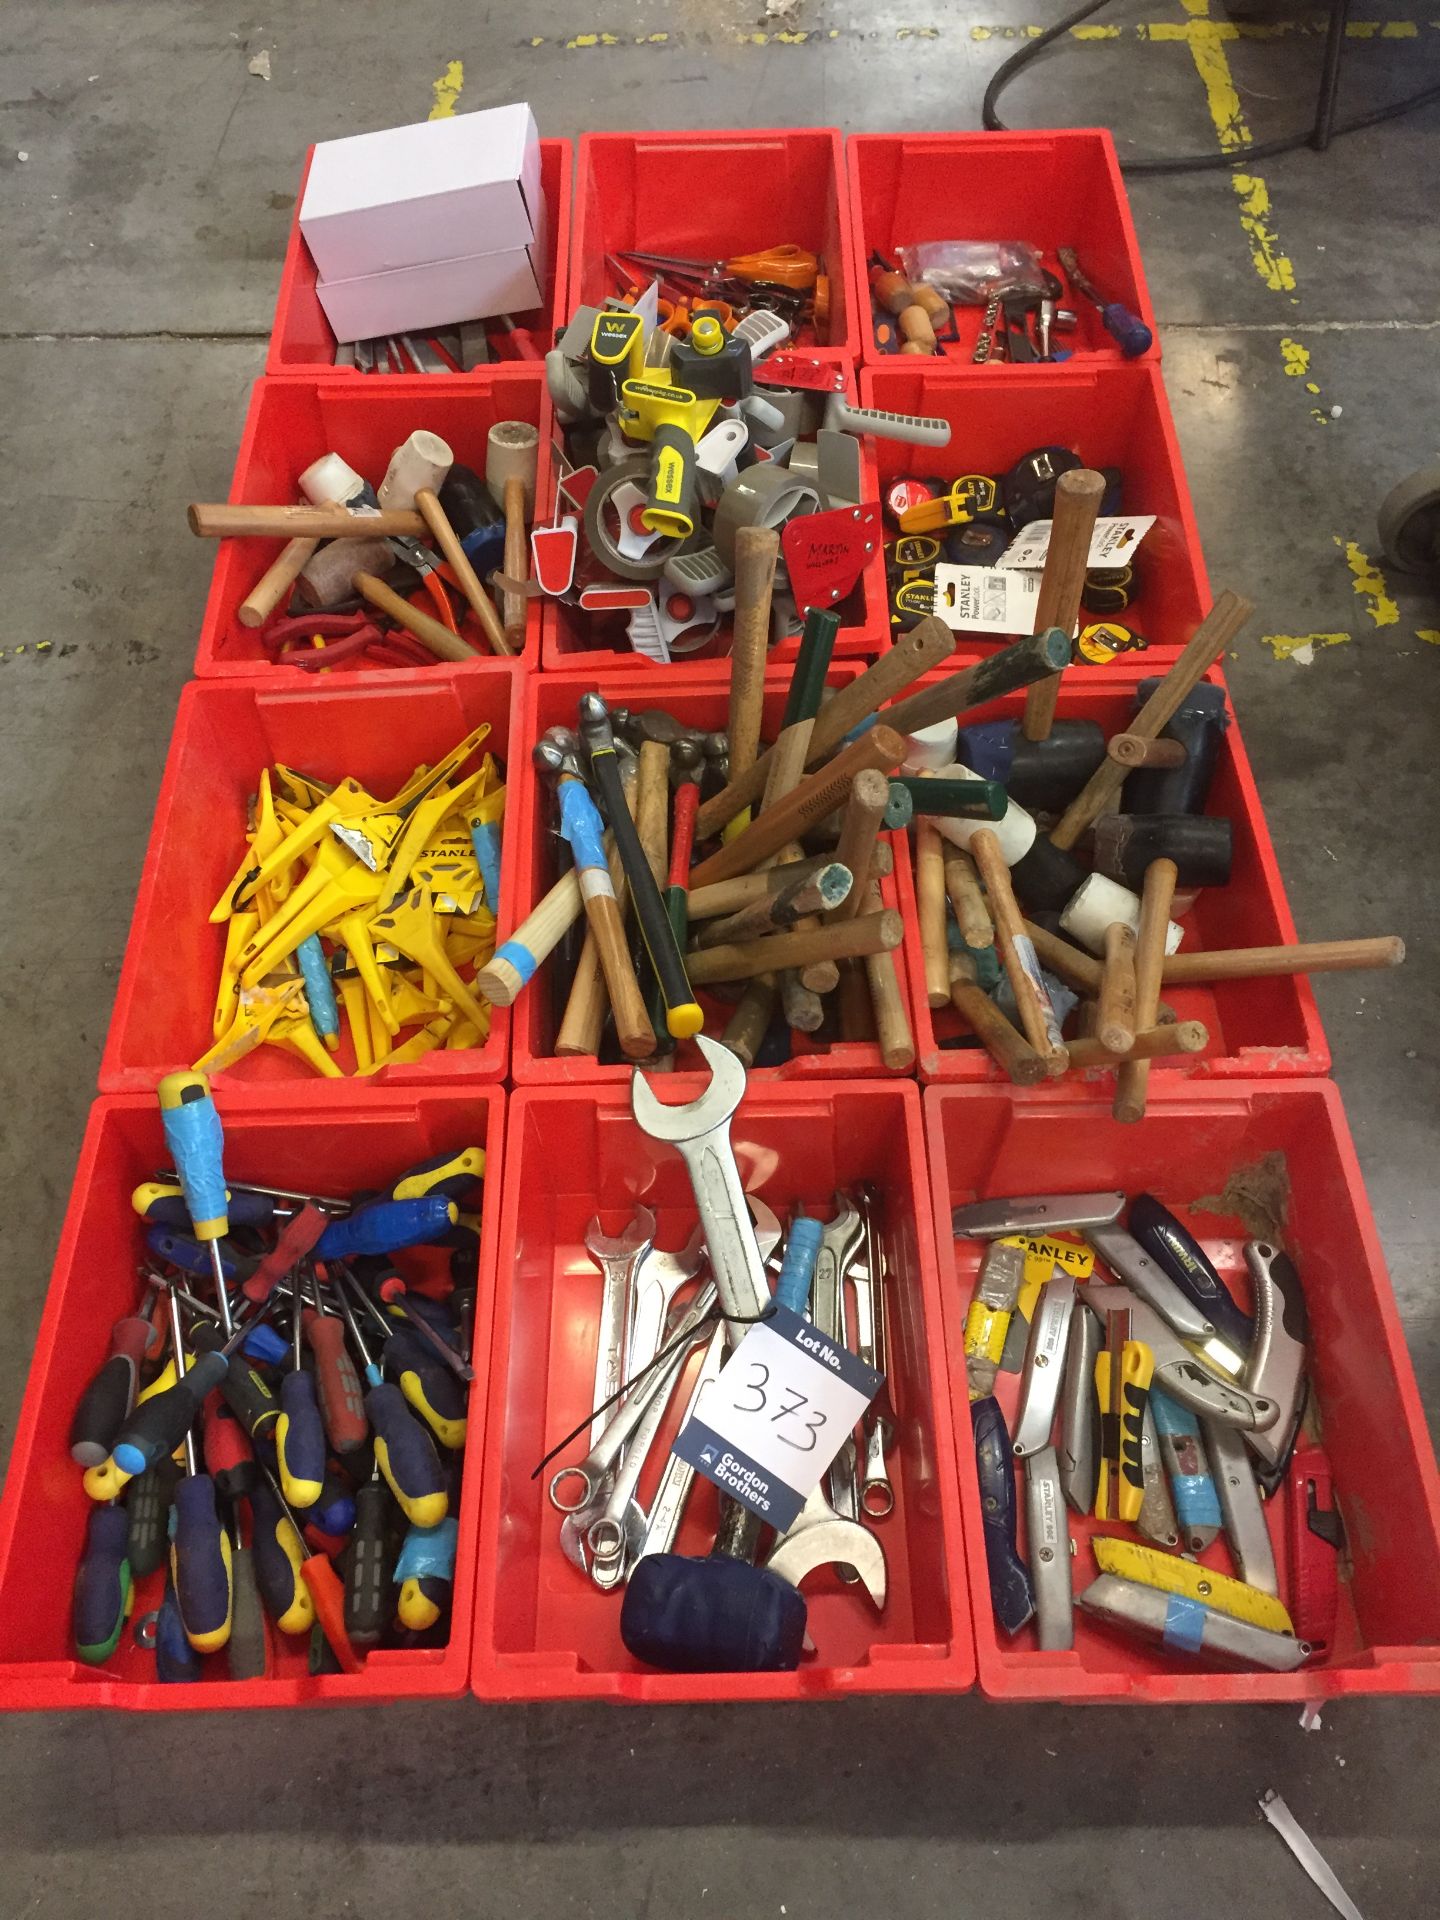 Selection of assorted small hand tools including; screwdrivers, tape measures, hammers, mallets,